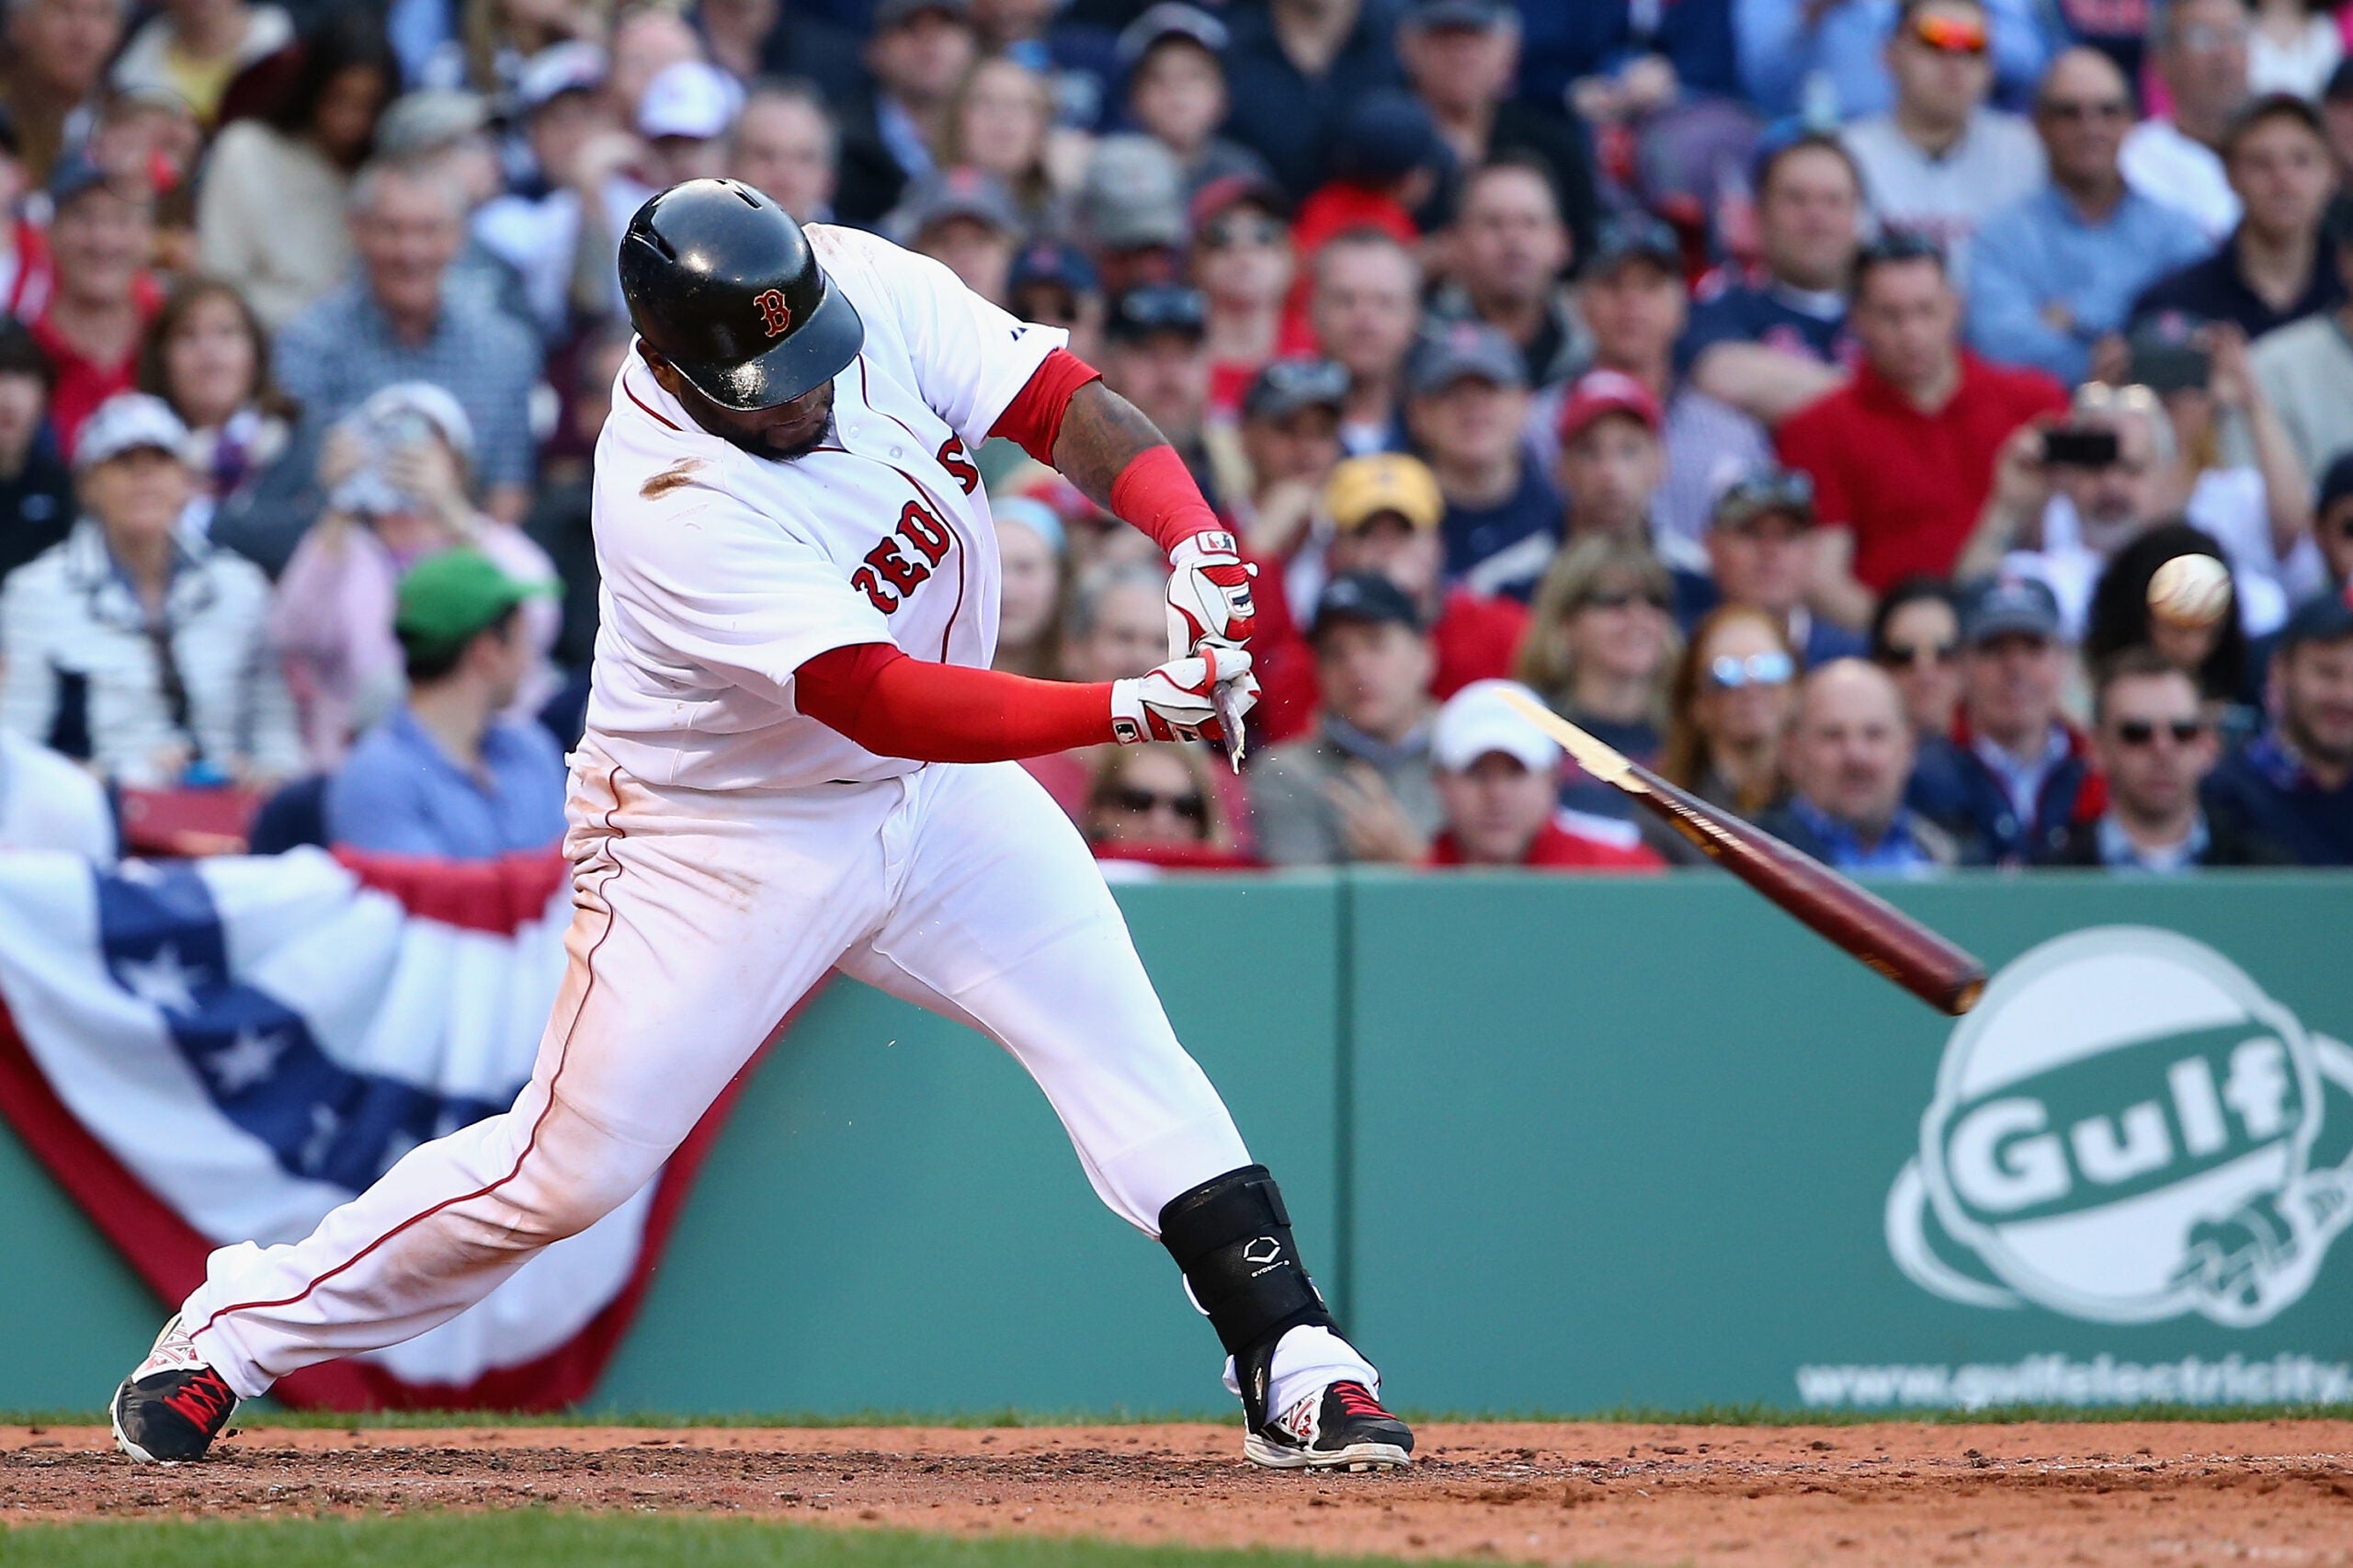 Shane Victorino to Give Up Switch-Hitting